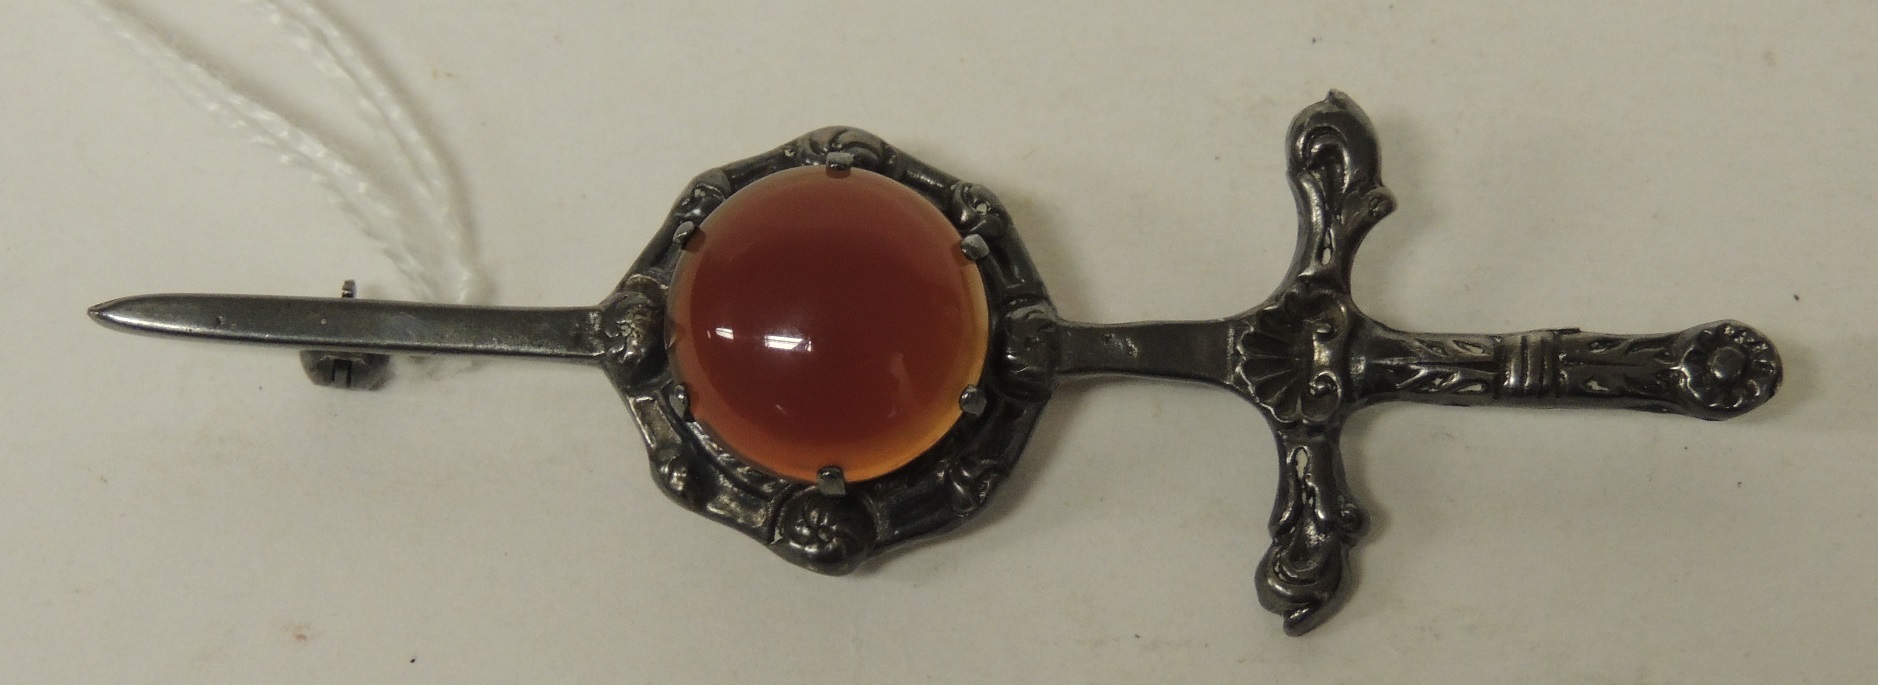 A Scottish silver brooch in the form of a sword and circular shield with a cabochon carnelian,